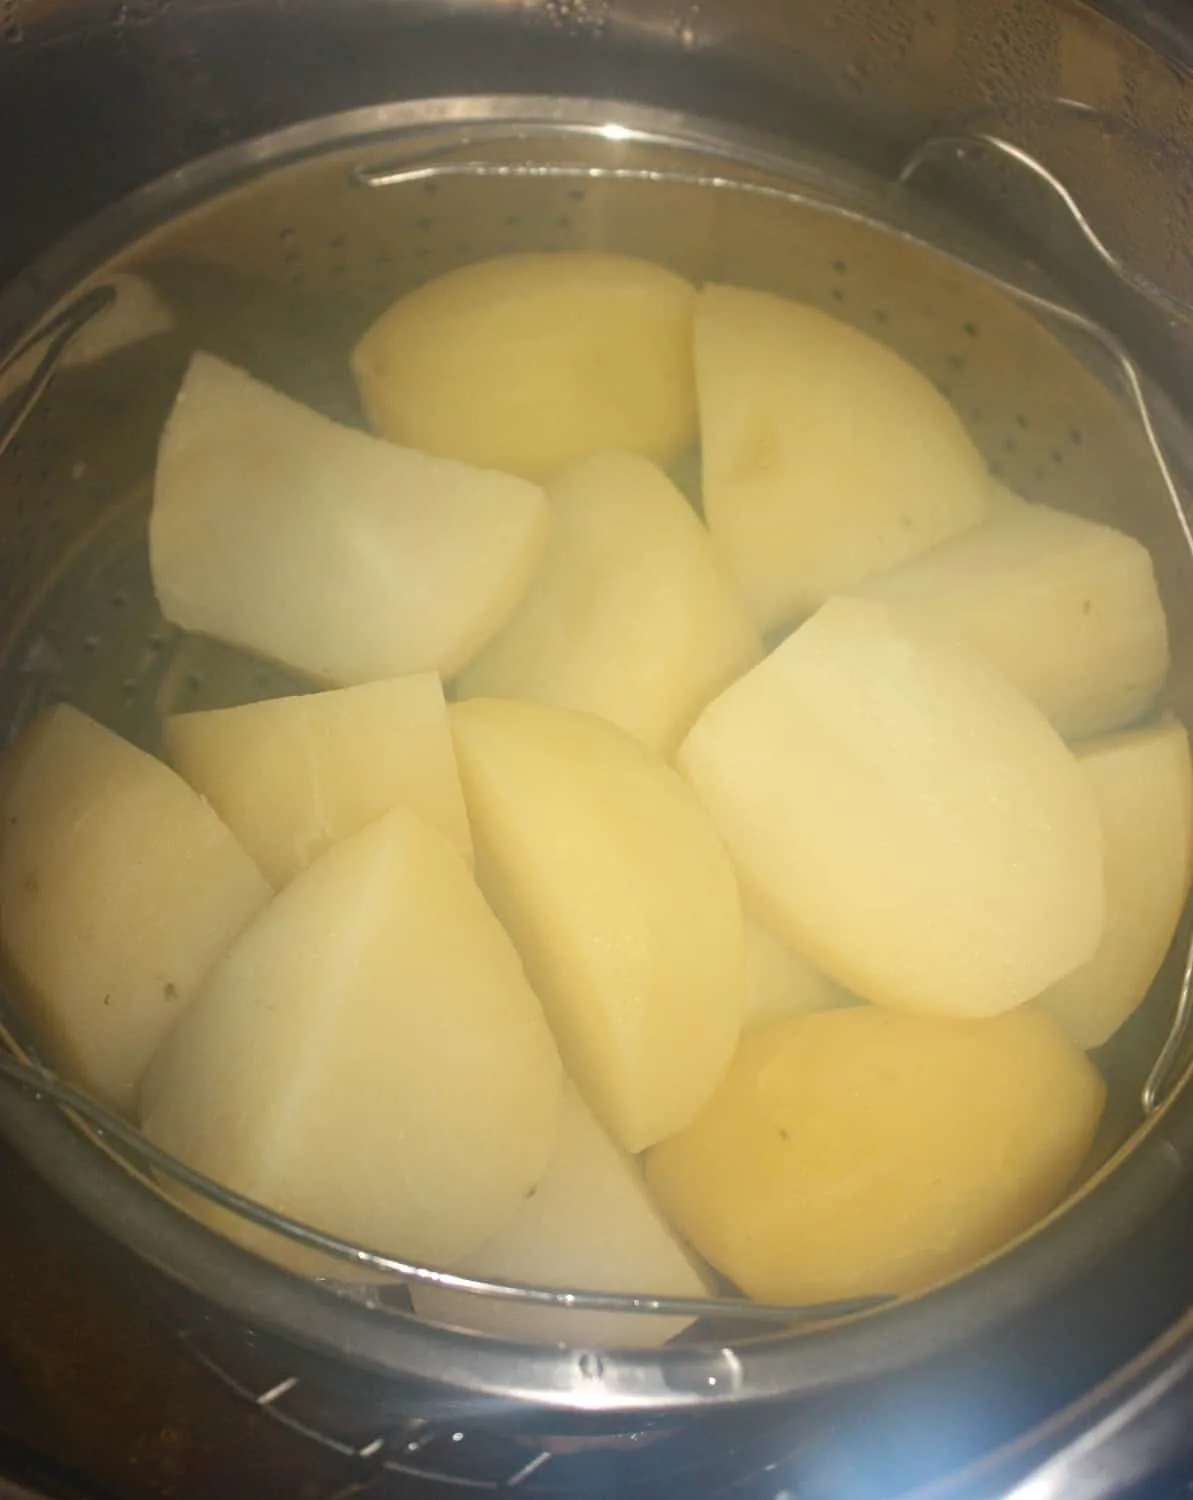 The cooked potatoes.